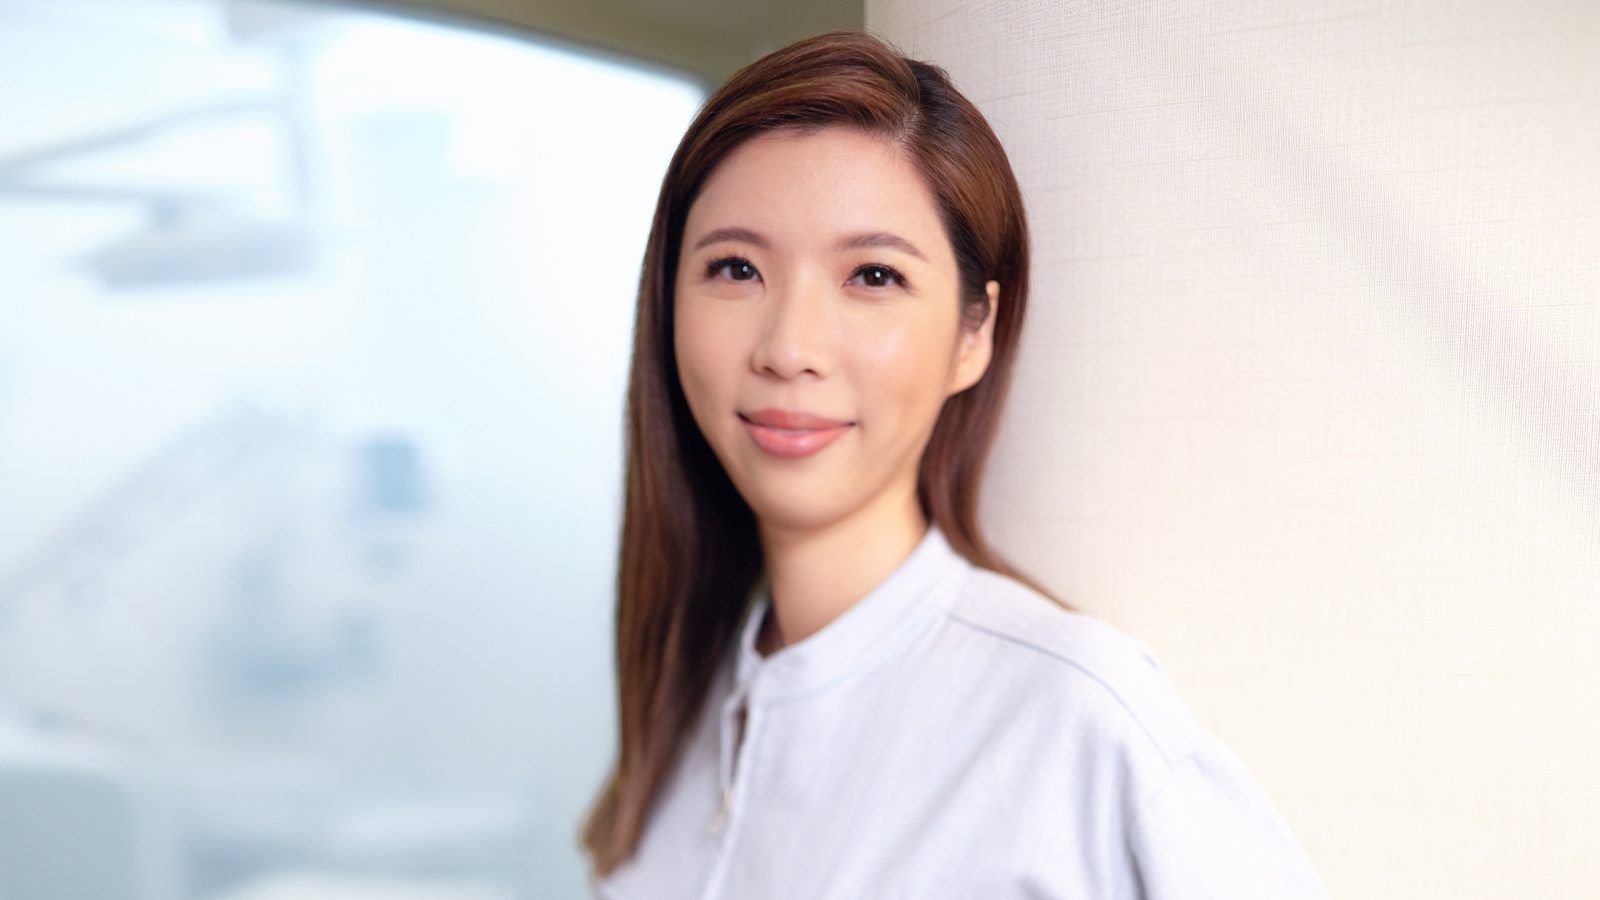 Dr Pura Cheng Employs Science and Art in the Quest for Aesthetic Elevation